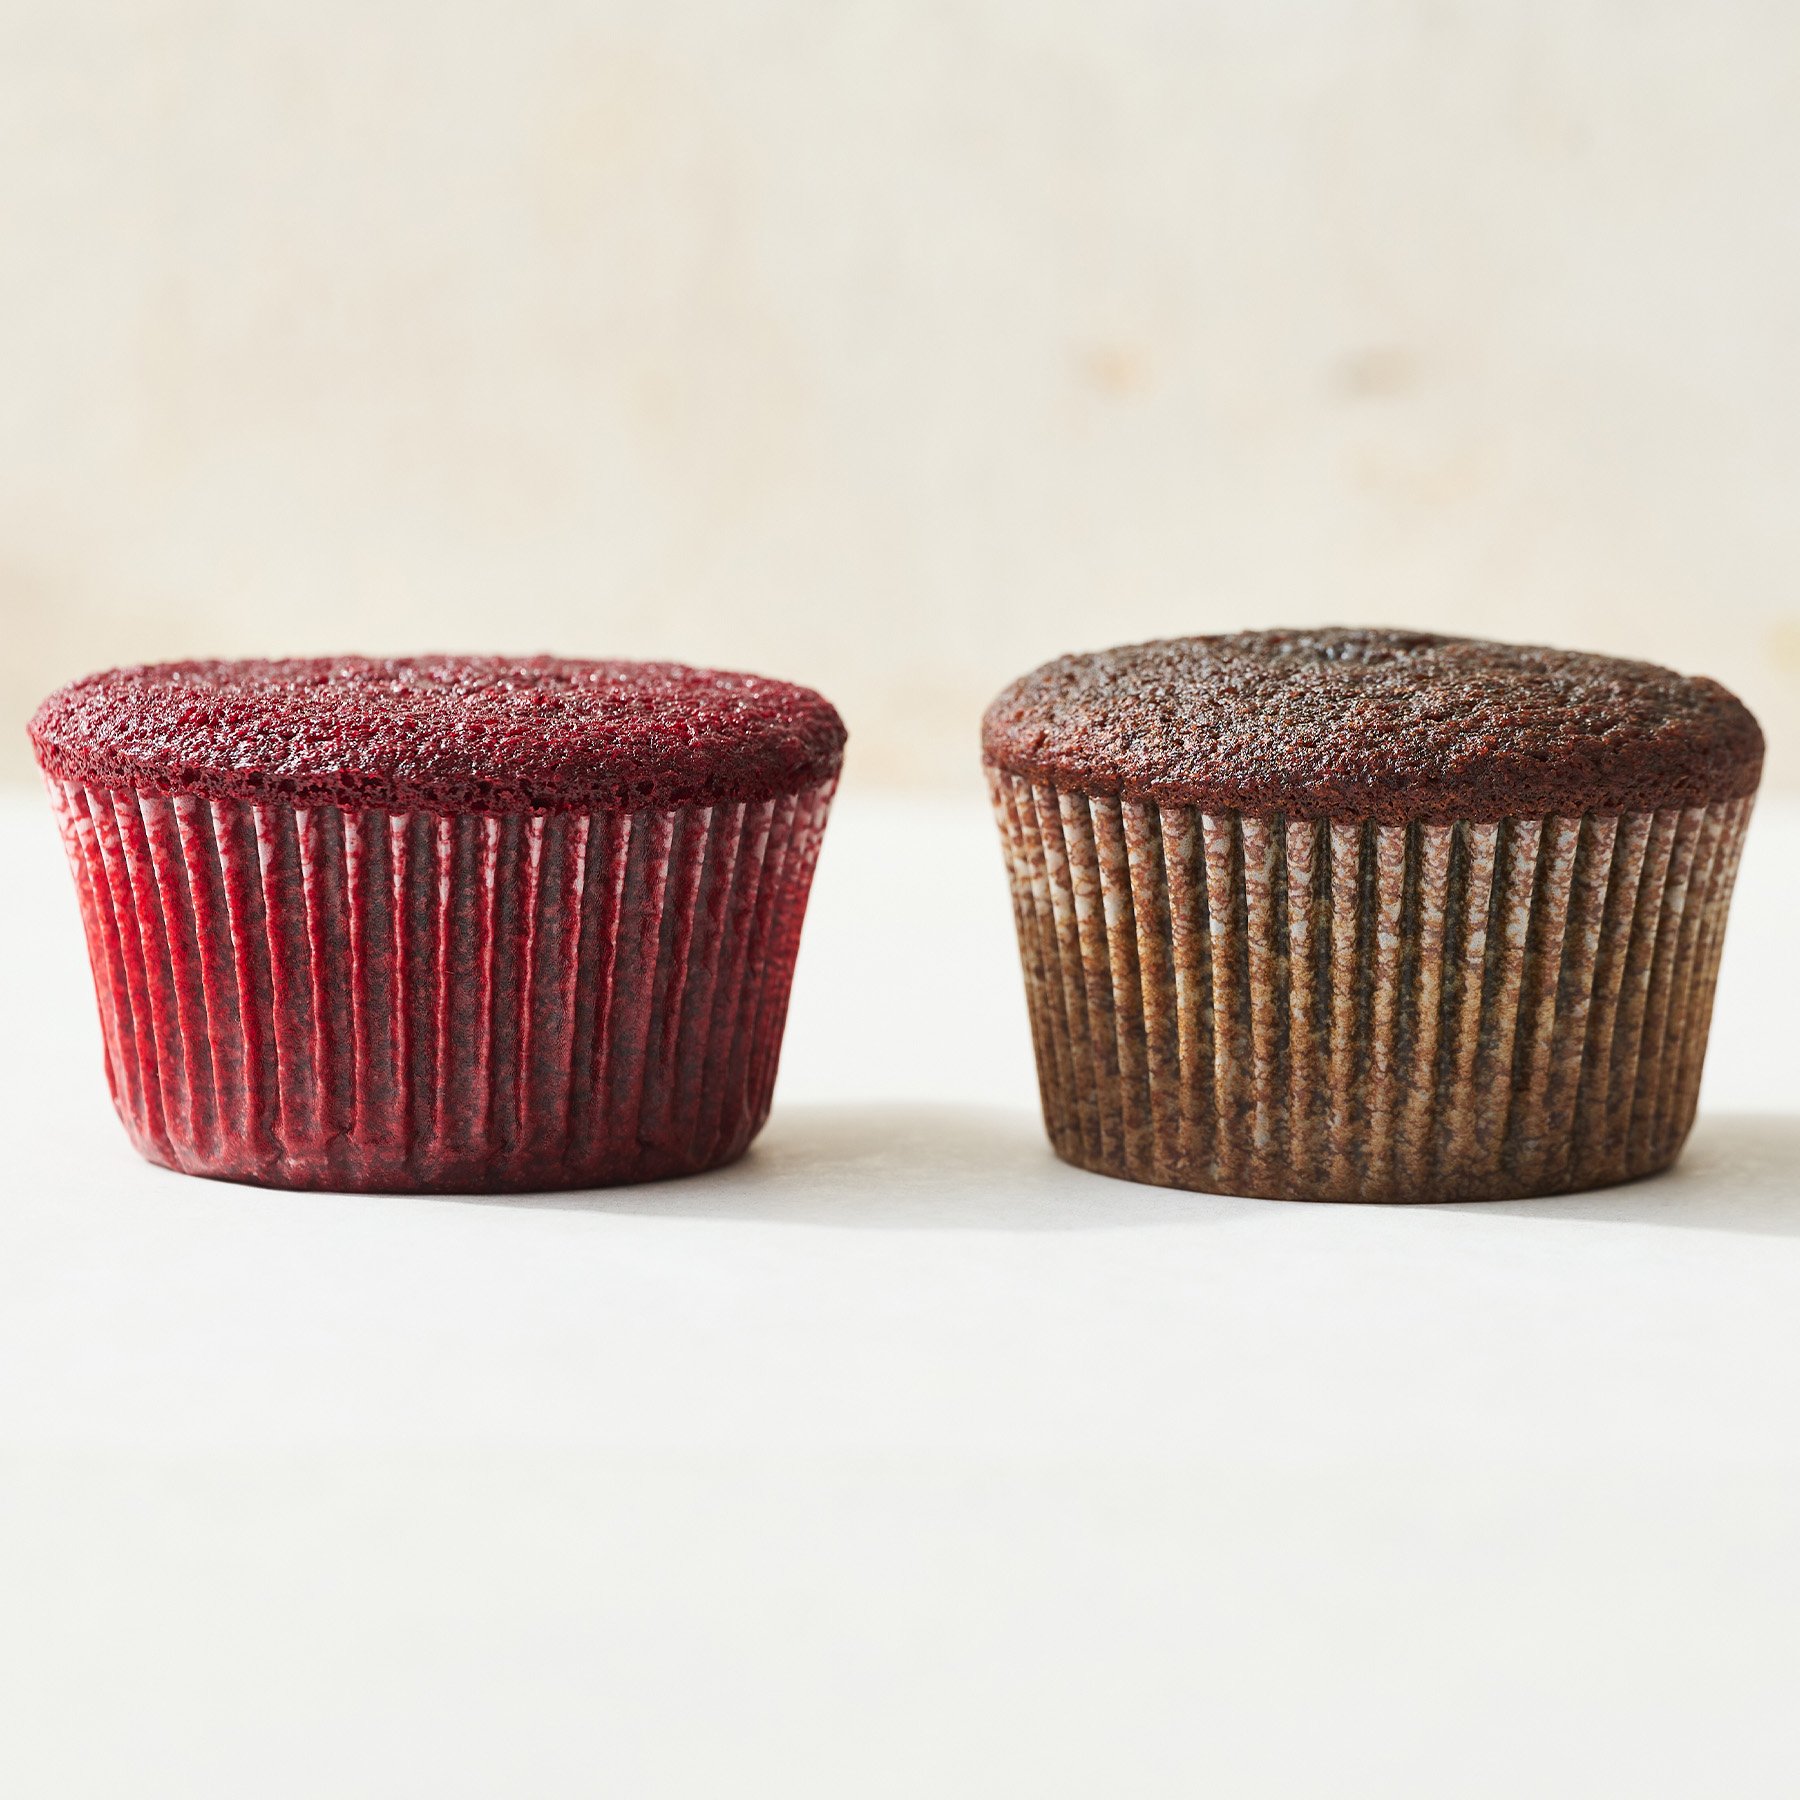 comparison of red velvet cupcakes made with artificial food coloring vs. natural food coloring